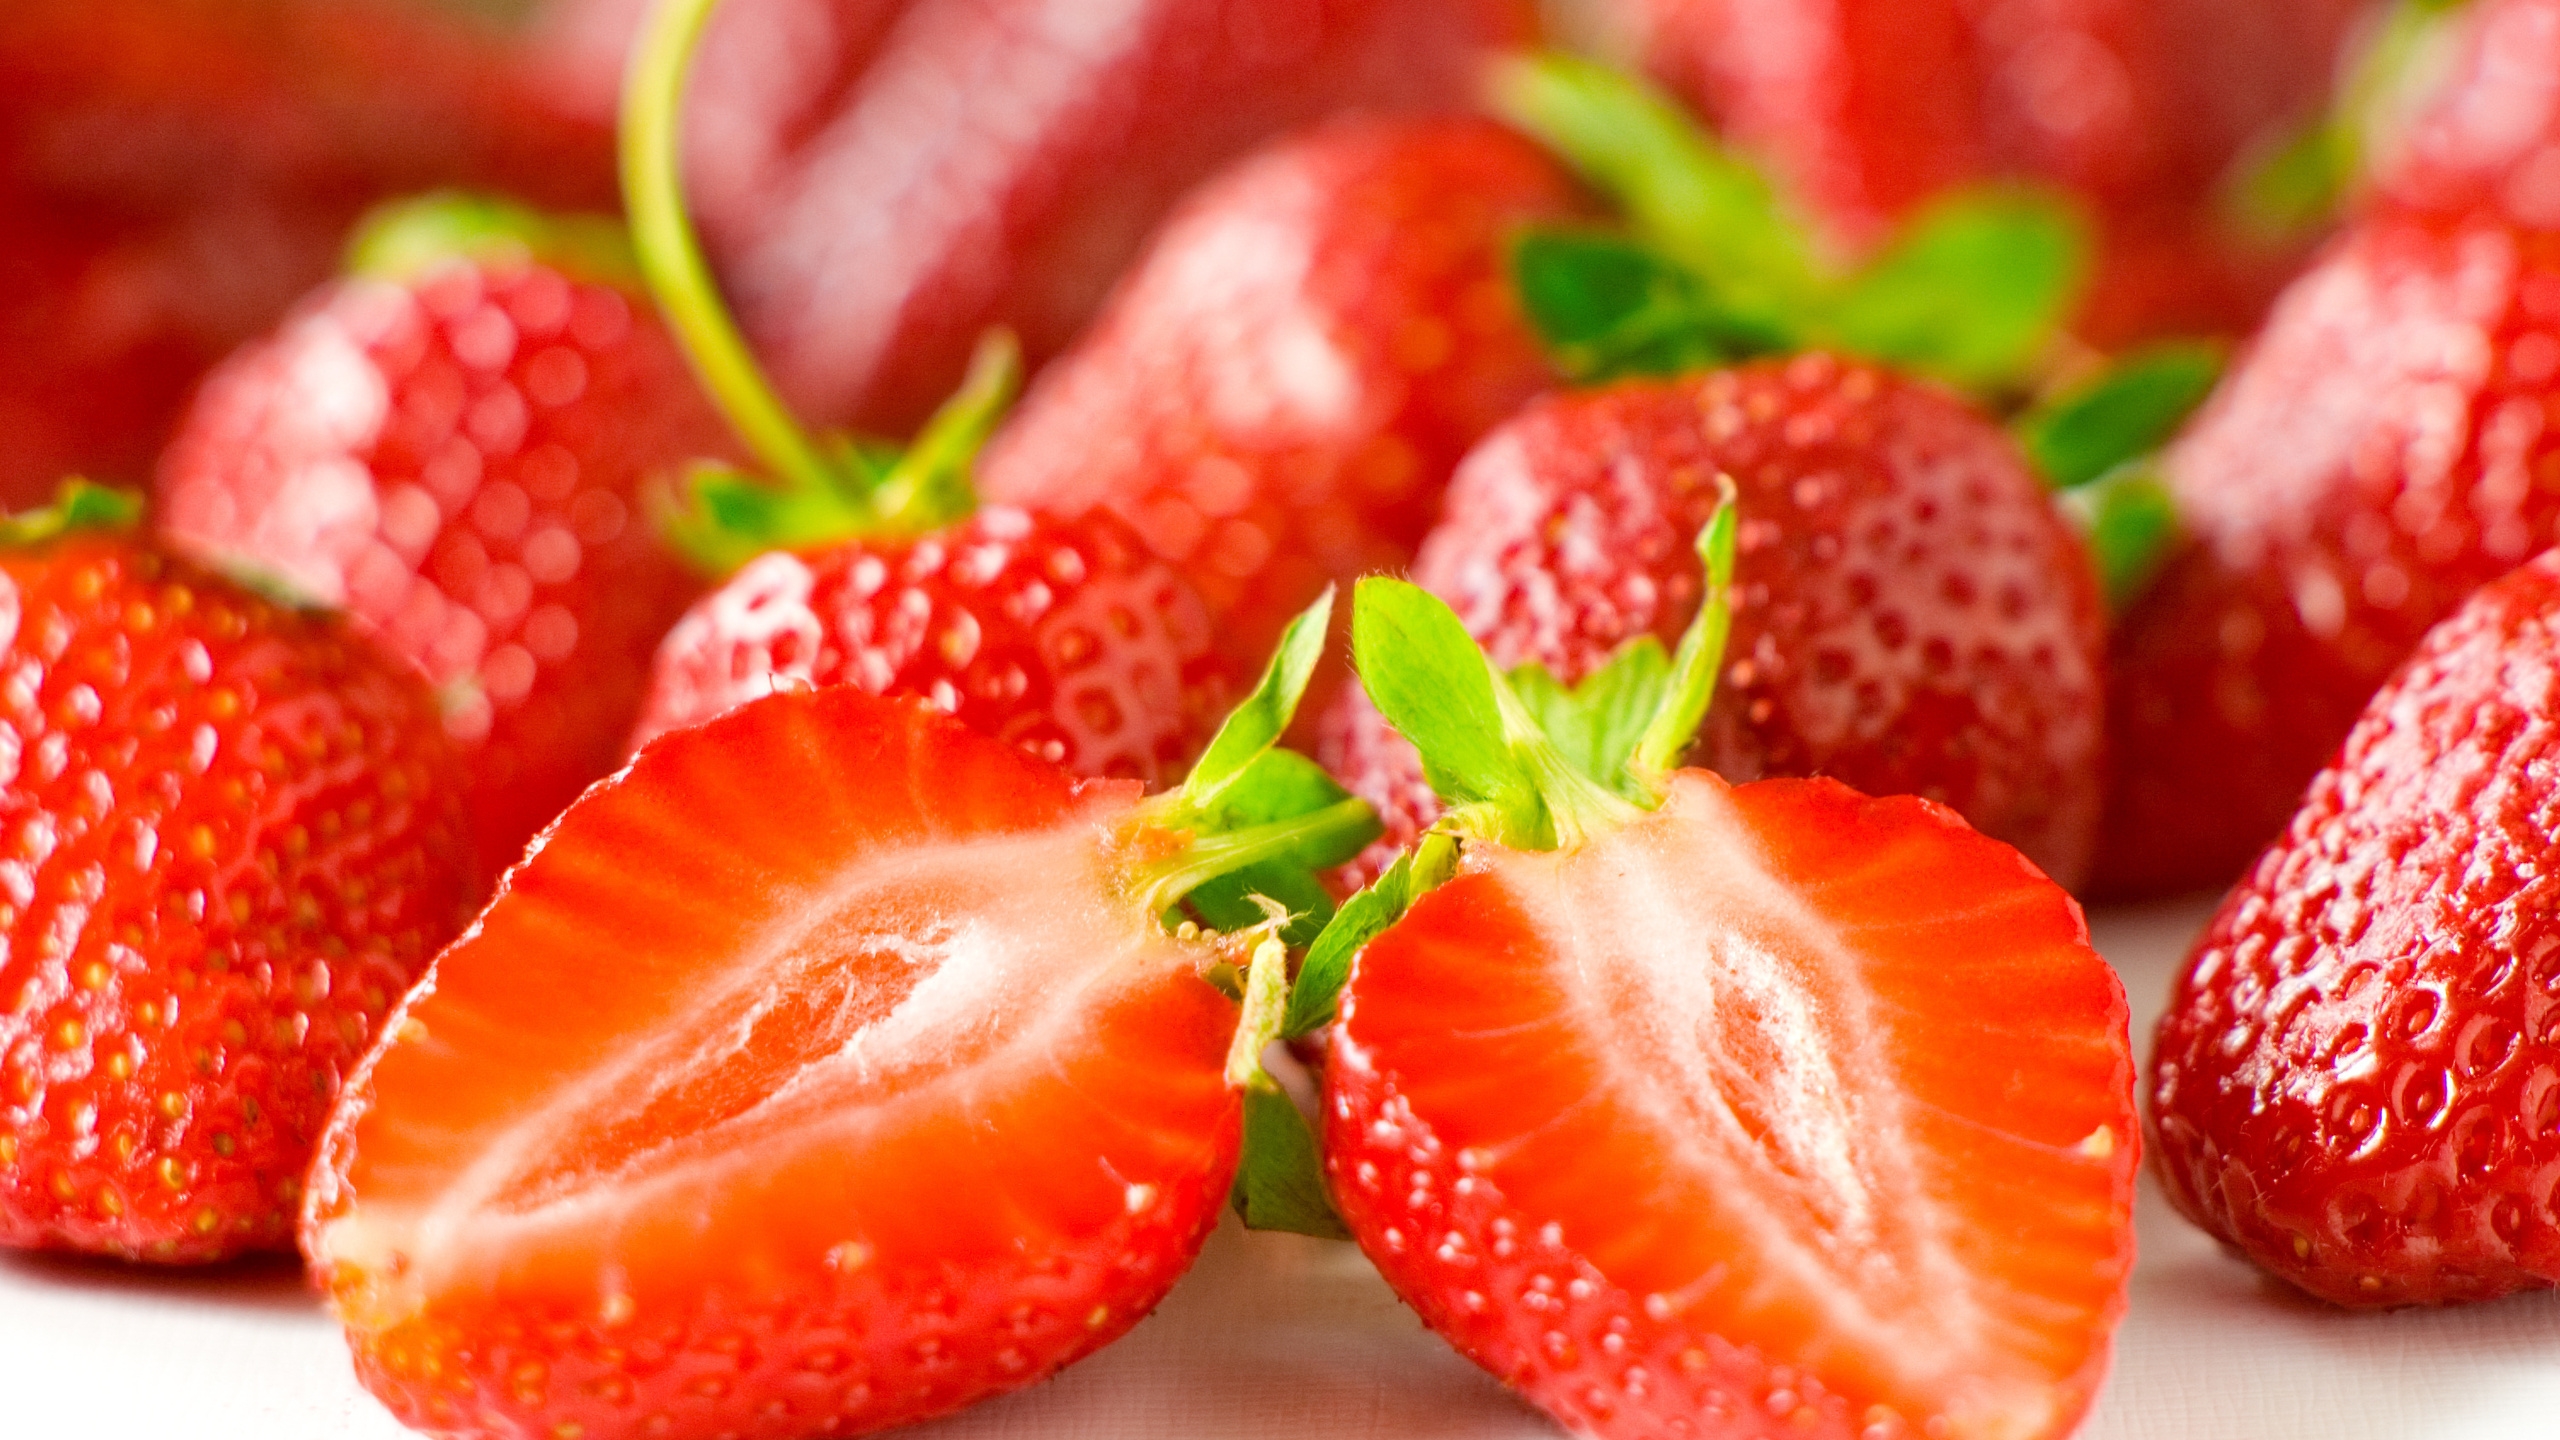 Strawberry Fruits for 2560x1440 HDTV resolution